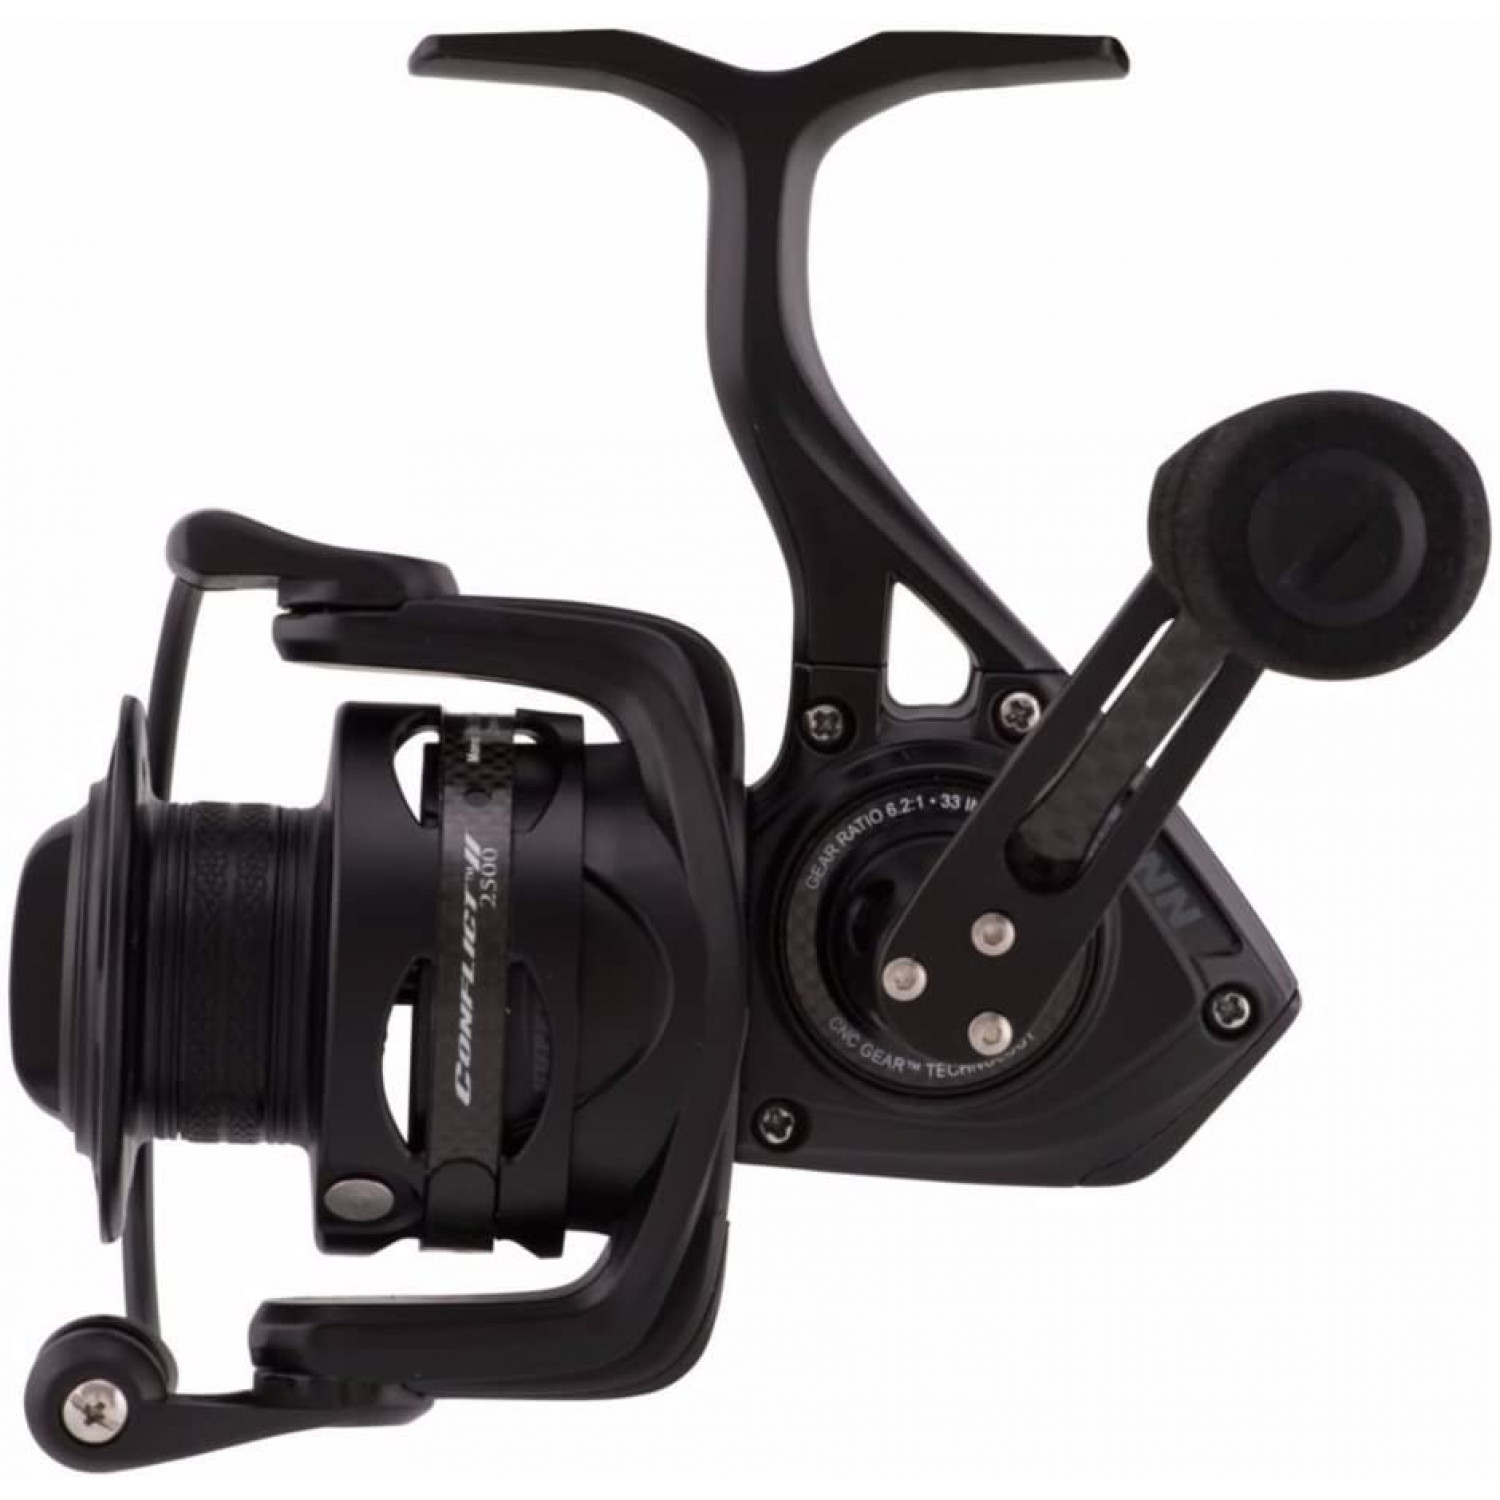 PENN Conflict II beidseitig Spinning Fishing reel Frontbremse